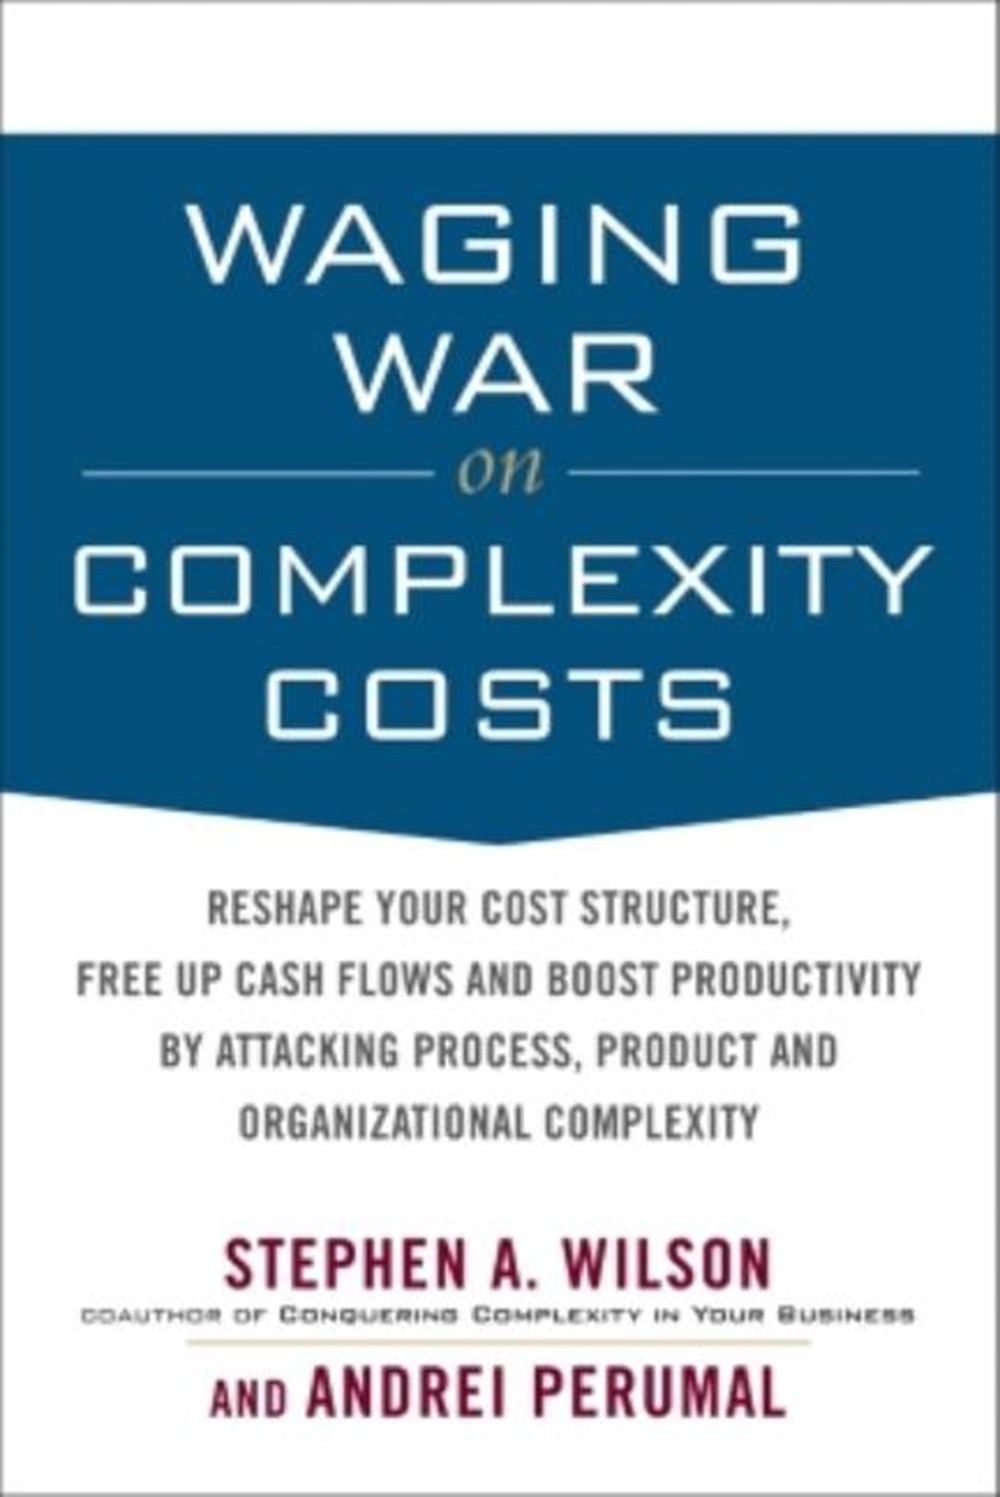 Waging War on Complexity Costs: Reshape Your Cost Structure, Free Up Cash Flows and Boost Productivi